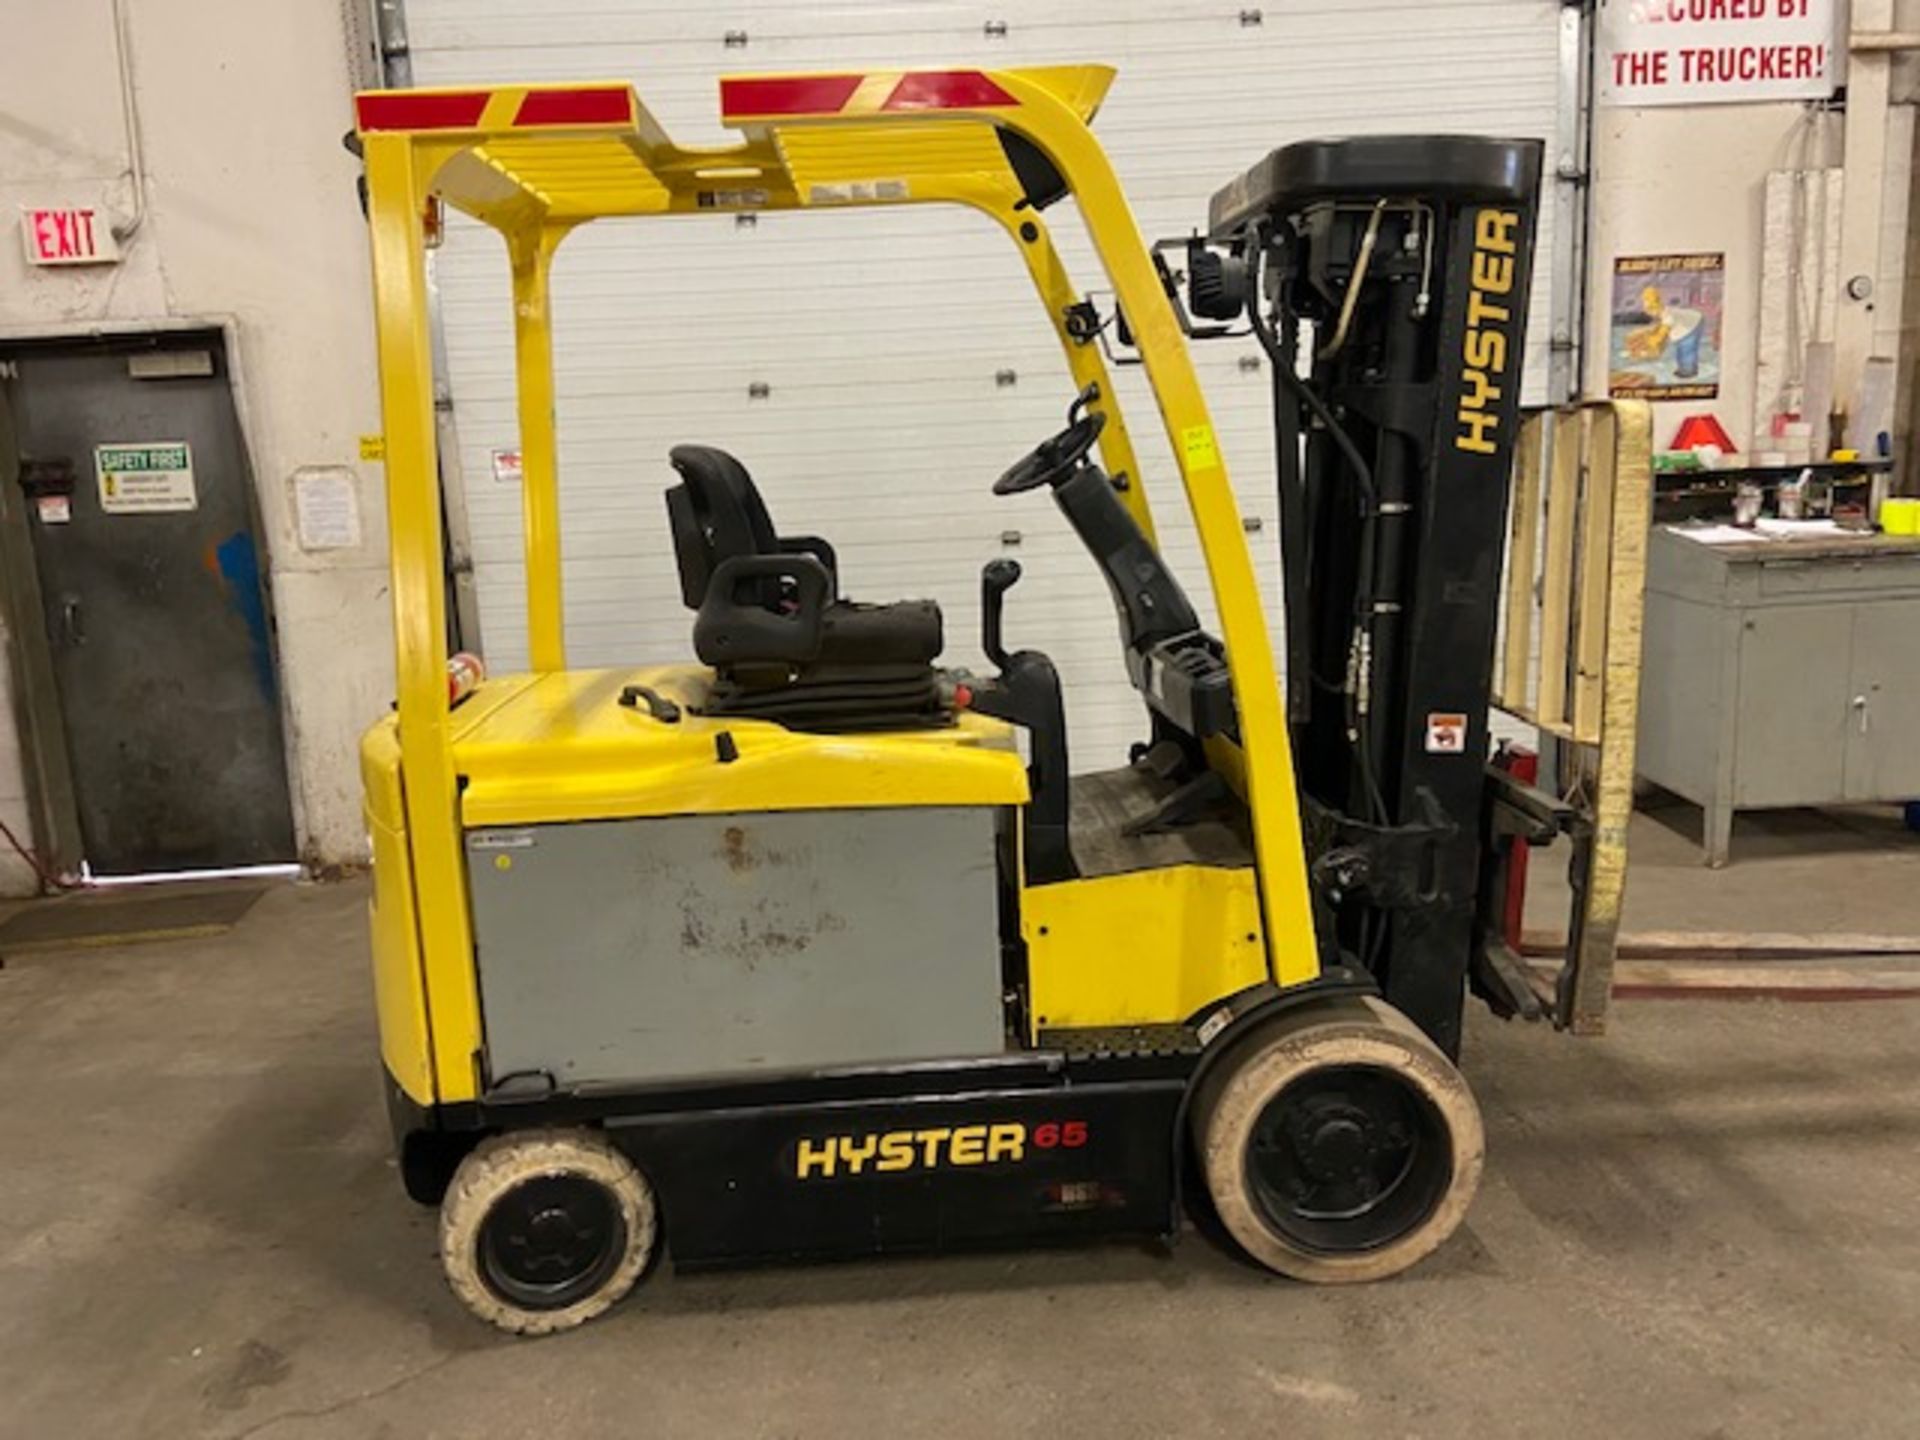 FREE CUSTOMS - 2013 Hyster 6500lbs Capacity Forklift with 4-stage mast - electric with sideshift &